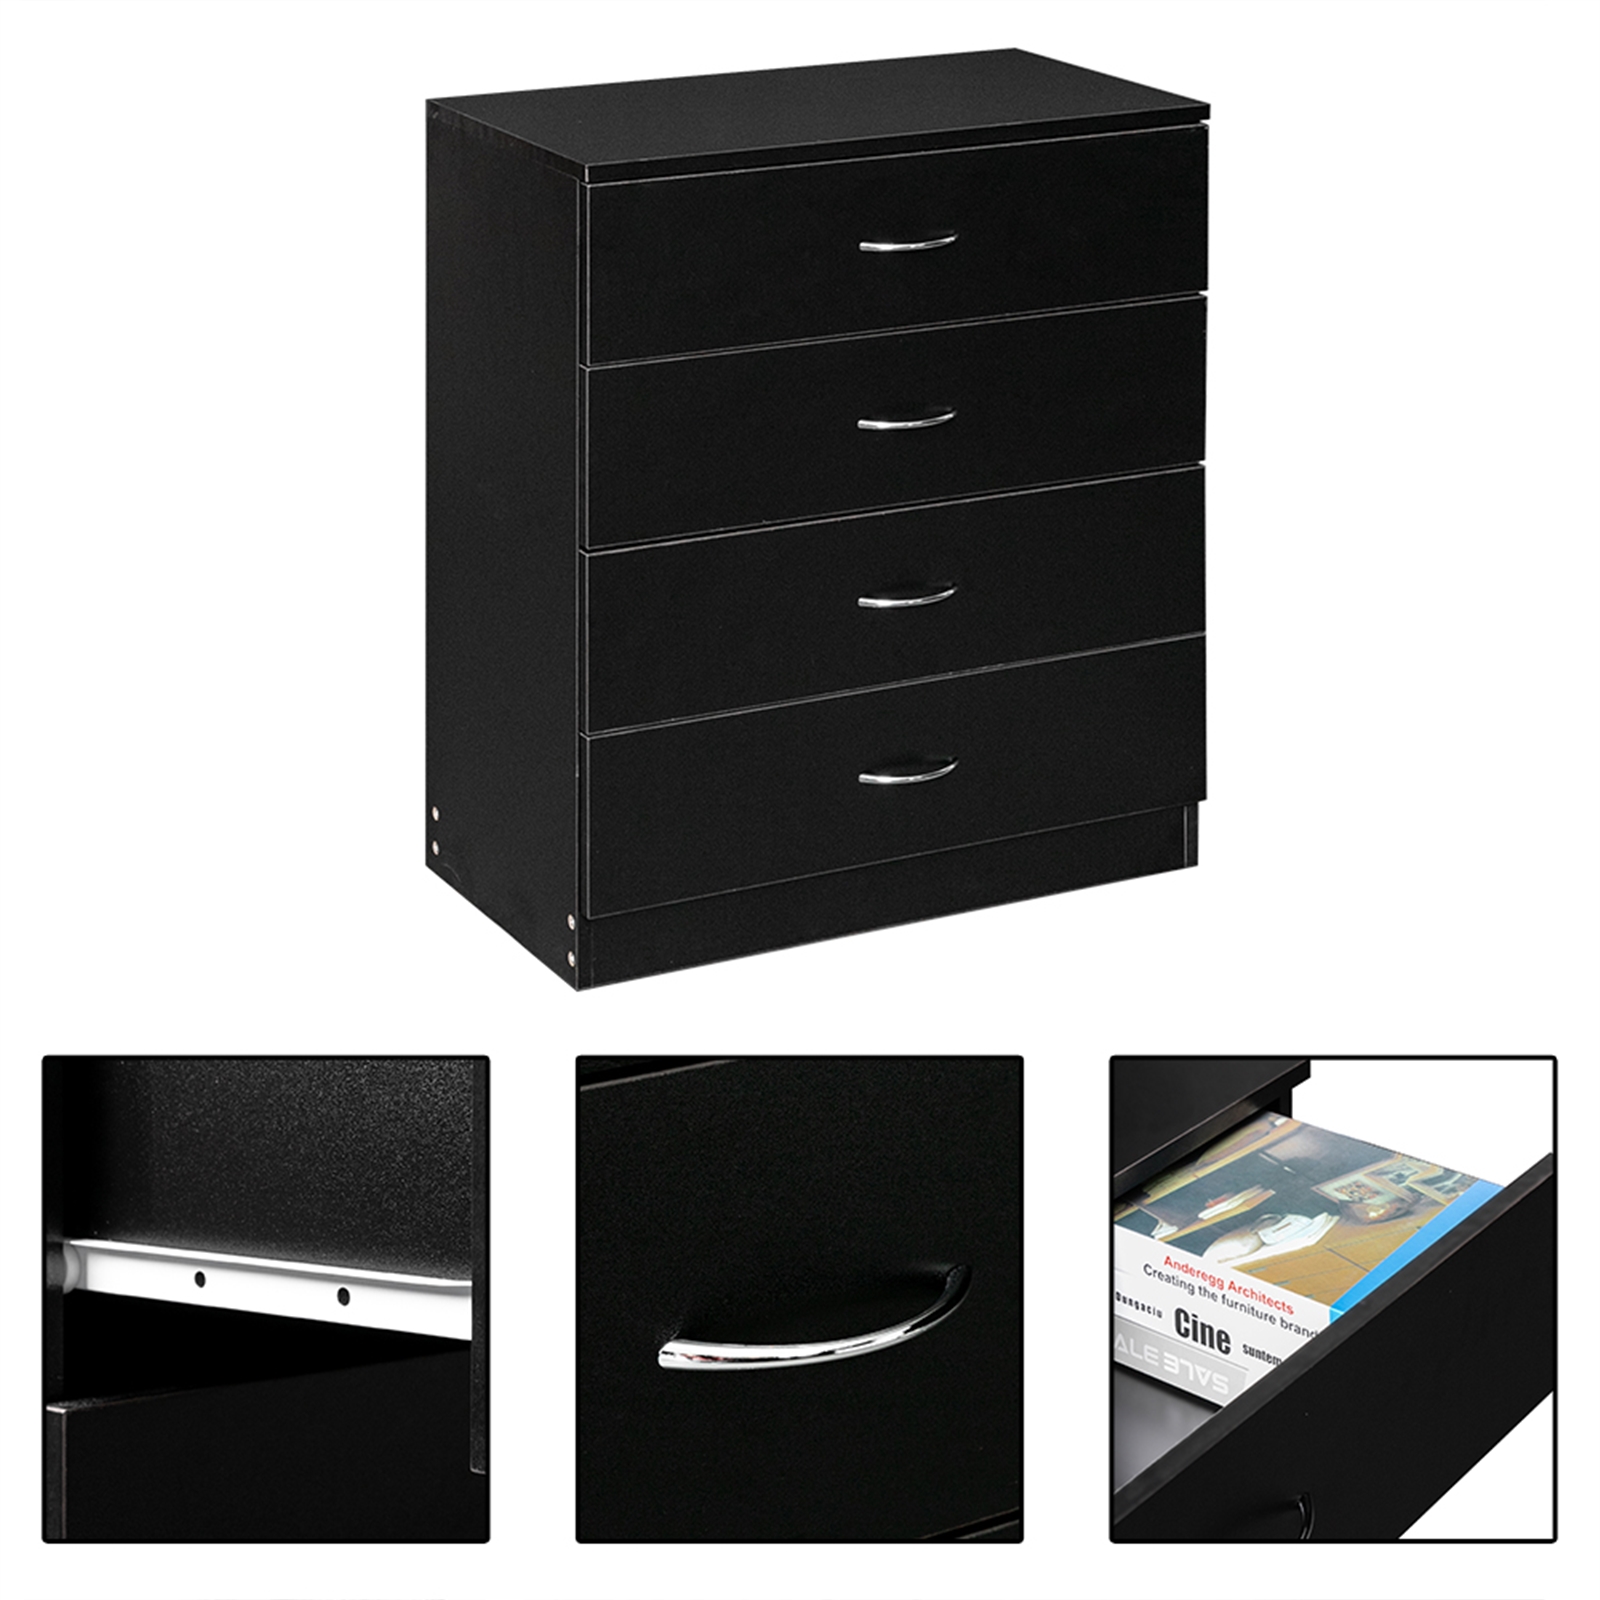 SYNGAR Modern Dresser Cabinet, Wooden 4-Drawer Dresser with Handles, Simple Home Storage Furniture of Drawers for Closet, Black Kids Storage Chest, Bedside Table of Bedroom for Clothes Cosmetic, D8780 - image 4 of 7